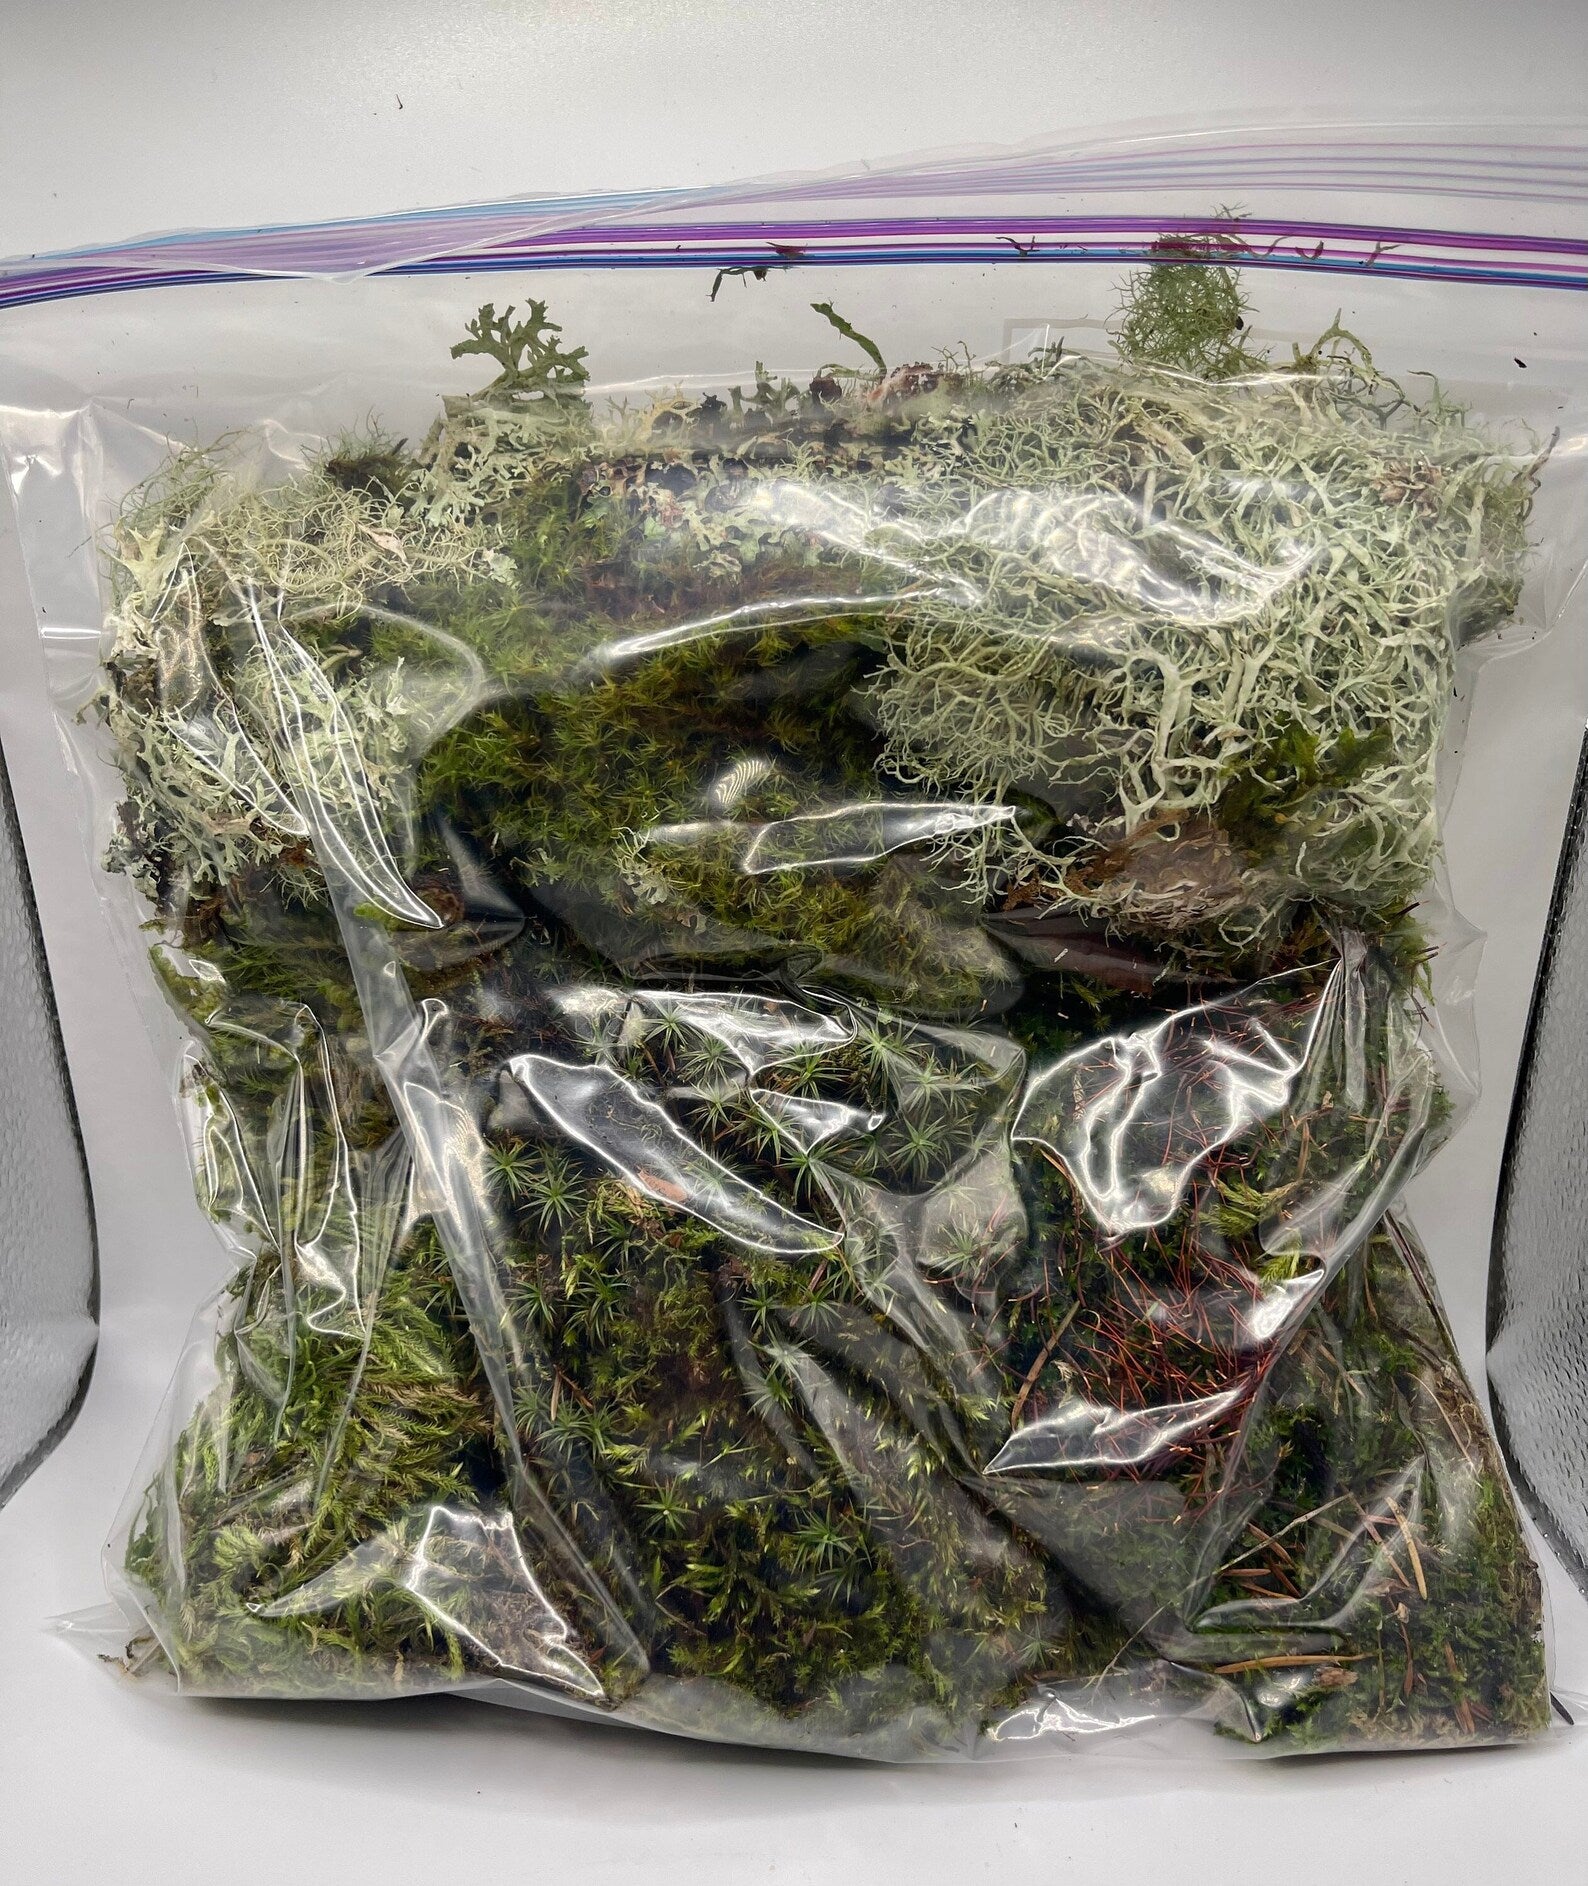 Extra Large Live Moss Grab Bag Fresh Green Healthy for Terrariums